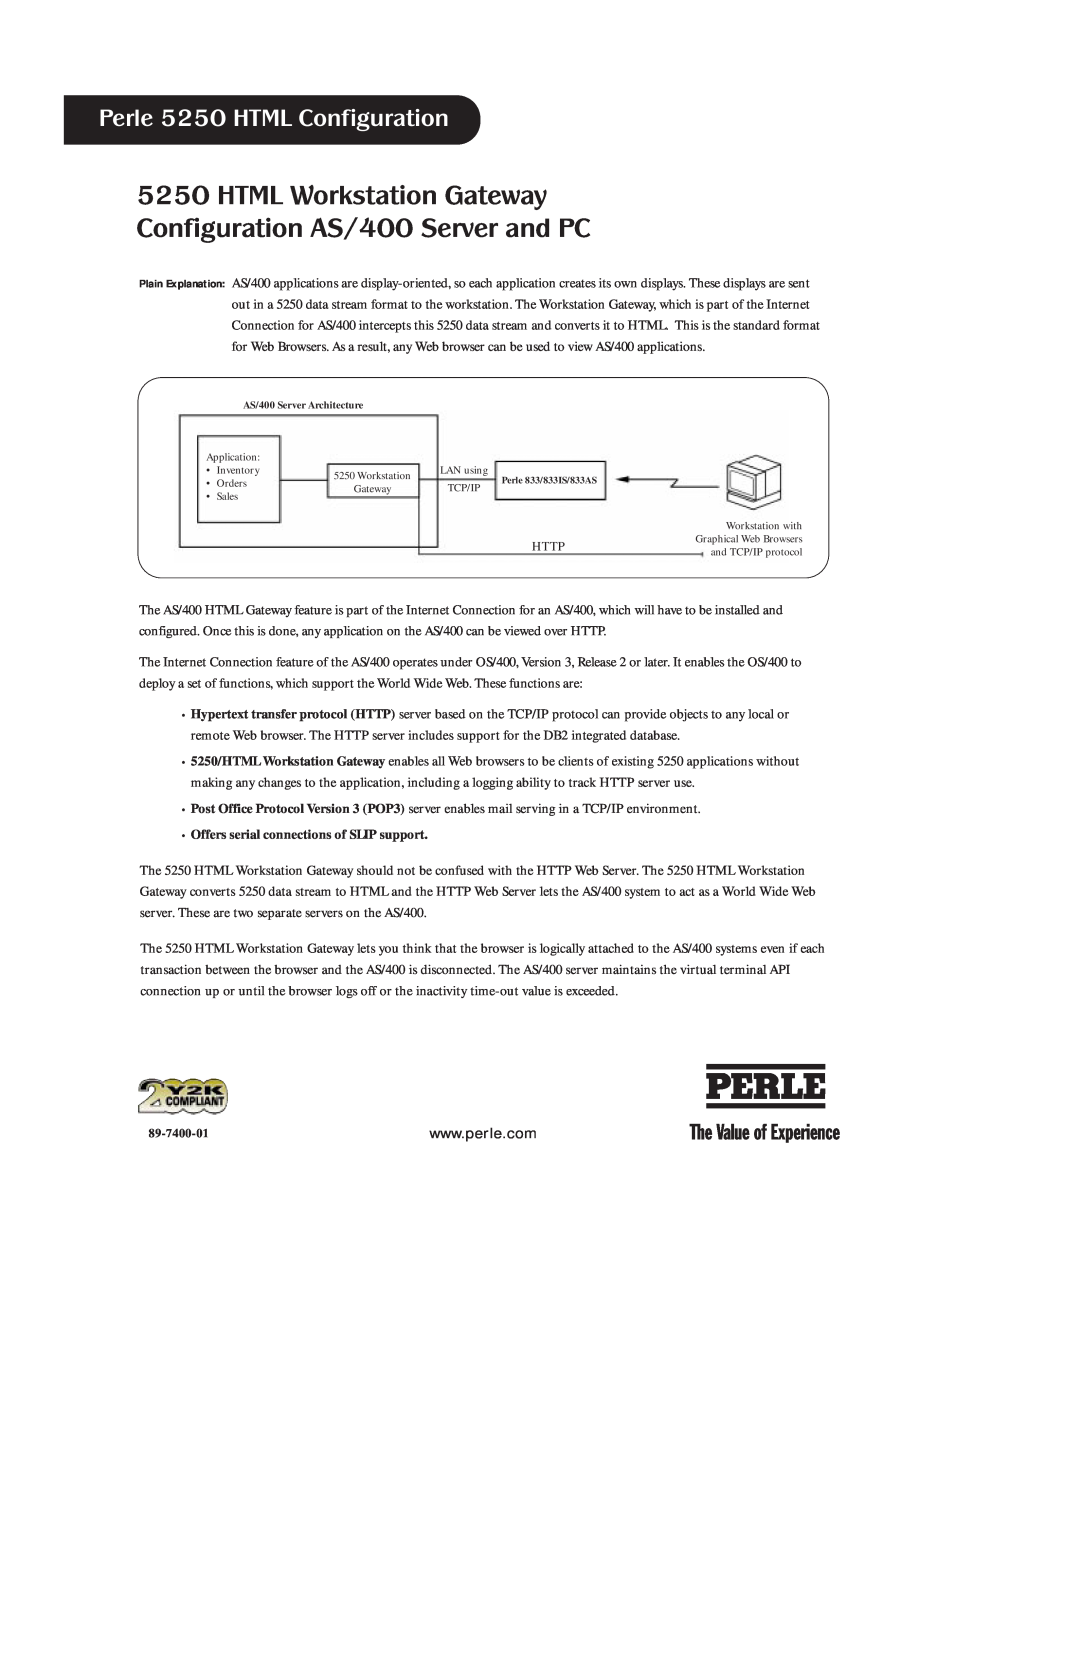 Perle Systems manual HTML Workstation Gateway Configuration AS/400 Server and PC, Perle 5250 HTML Configuration 